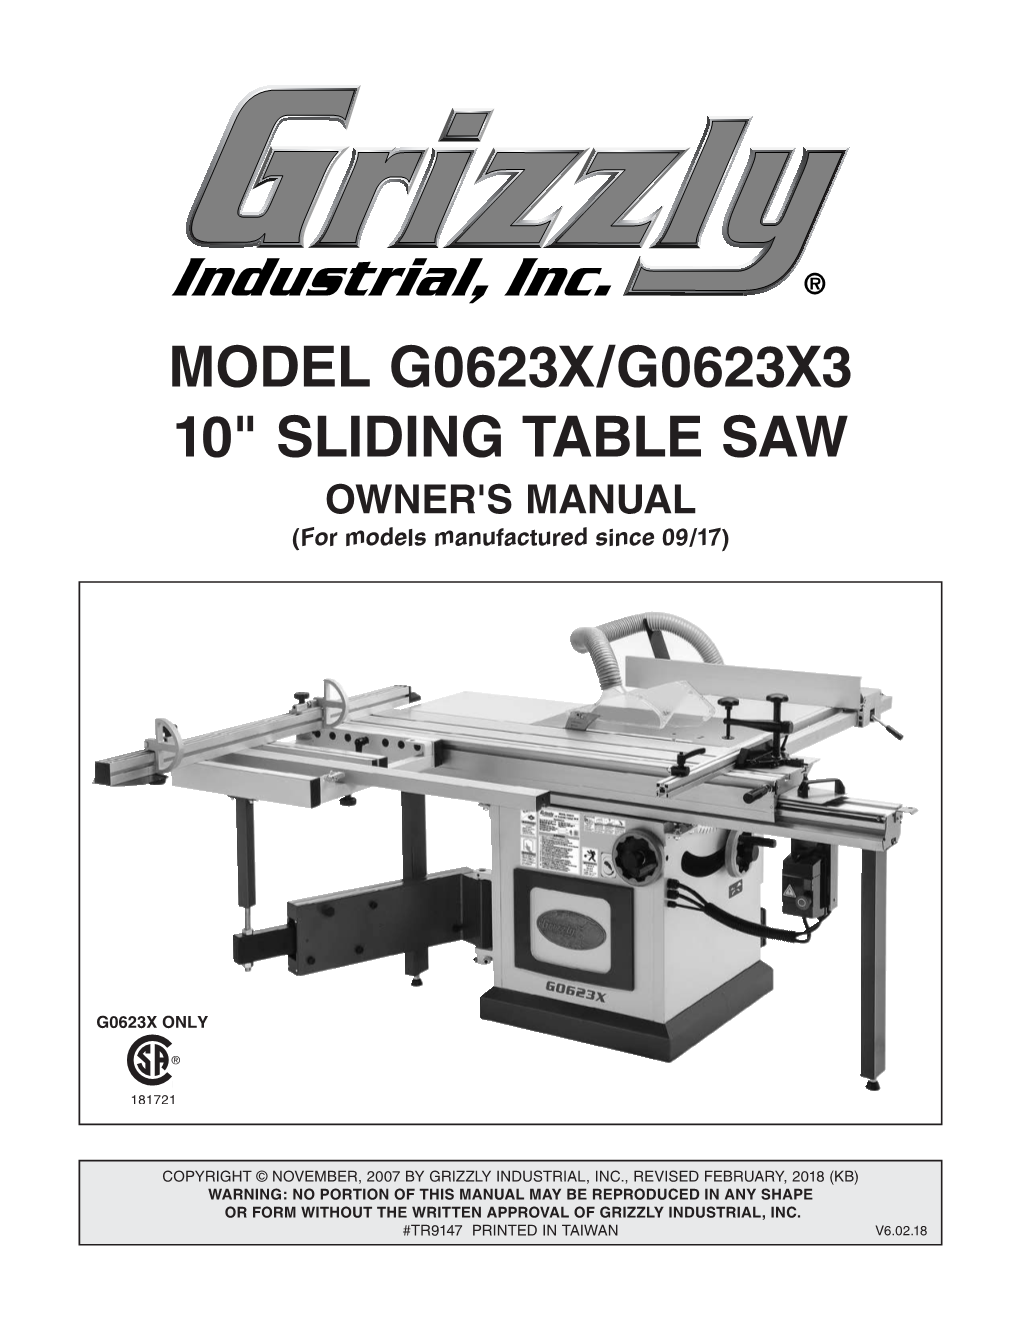 MODEL G0623X/G0623X3 10" SLIDING TABLE SAW OWNER's MANUAL (For Models Manufactured Since 09/17)